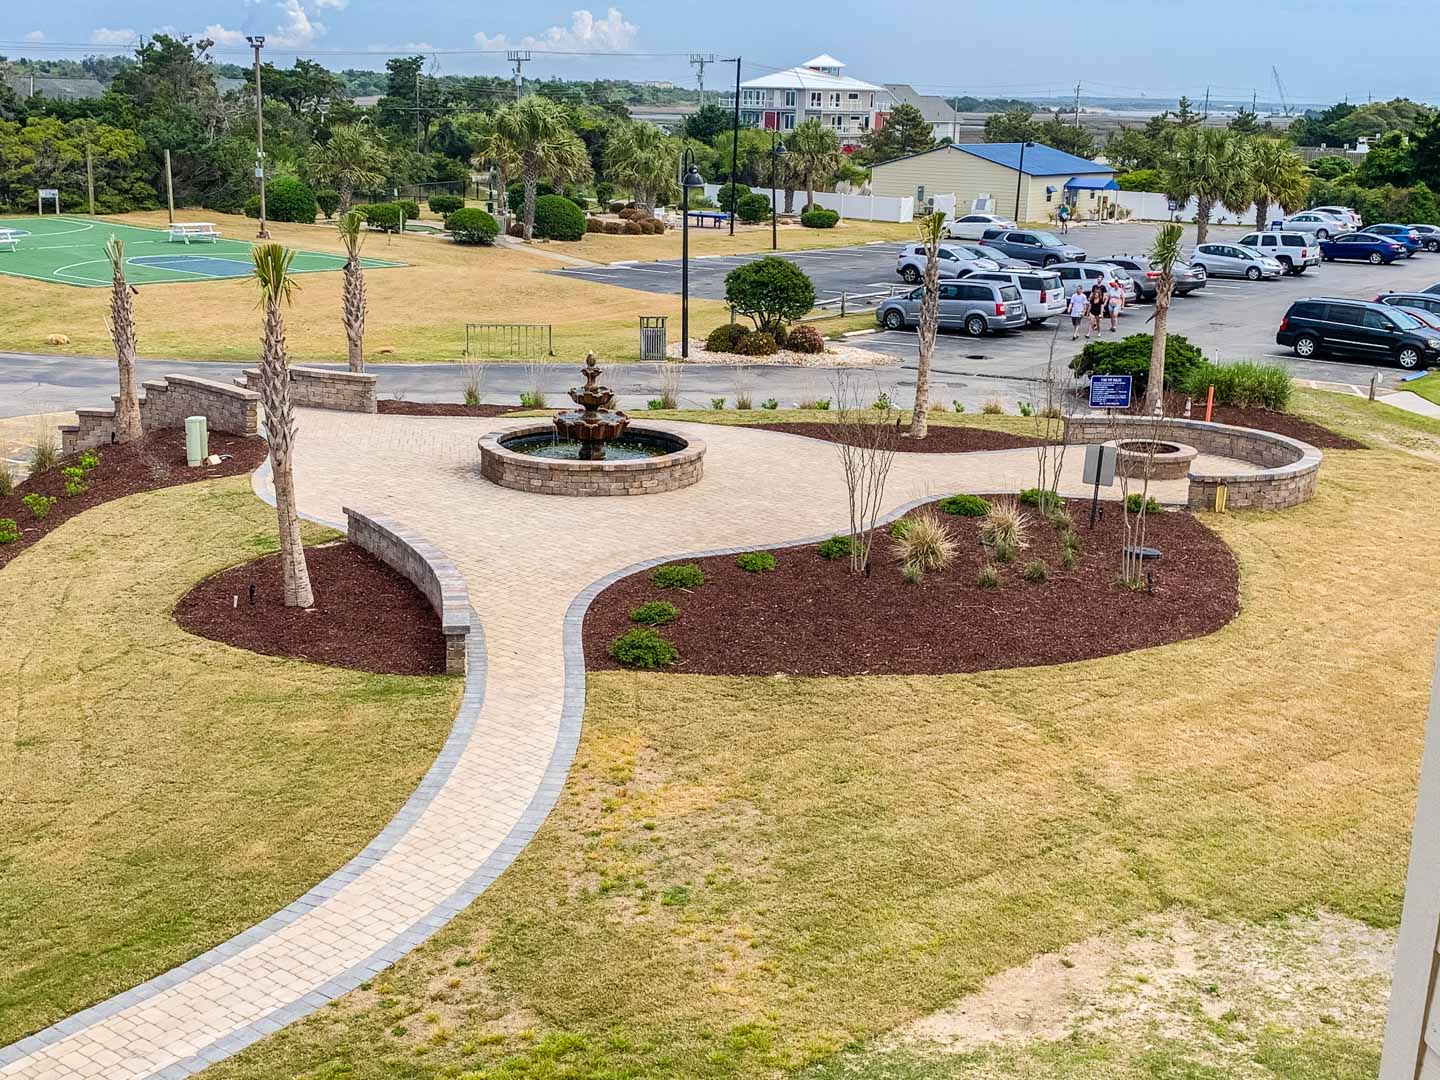 A beautiful resort entrance at VRI's A Place at the Beach in Atlantic Beach, NC.